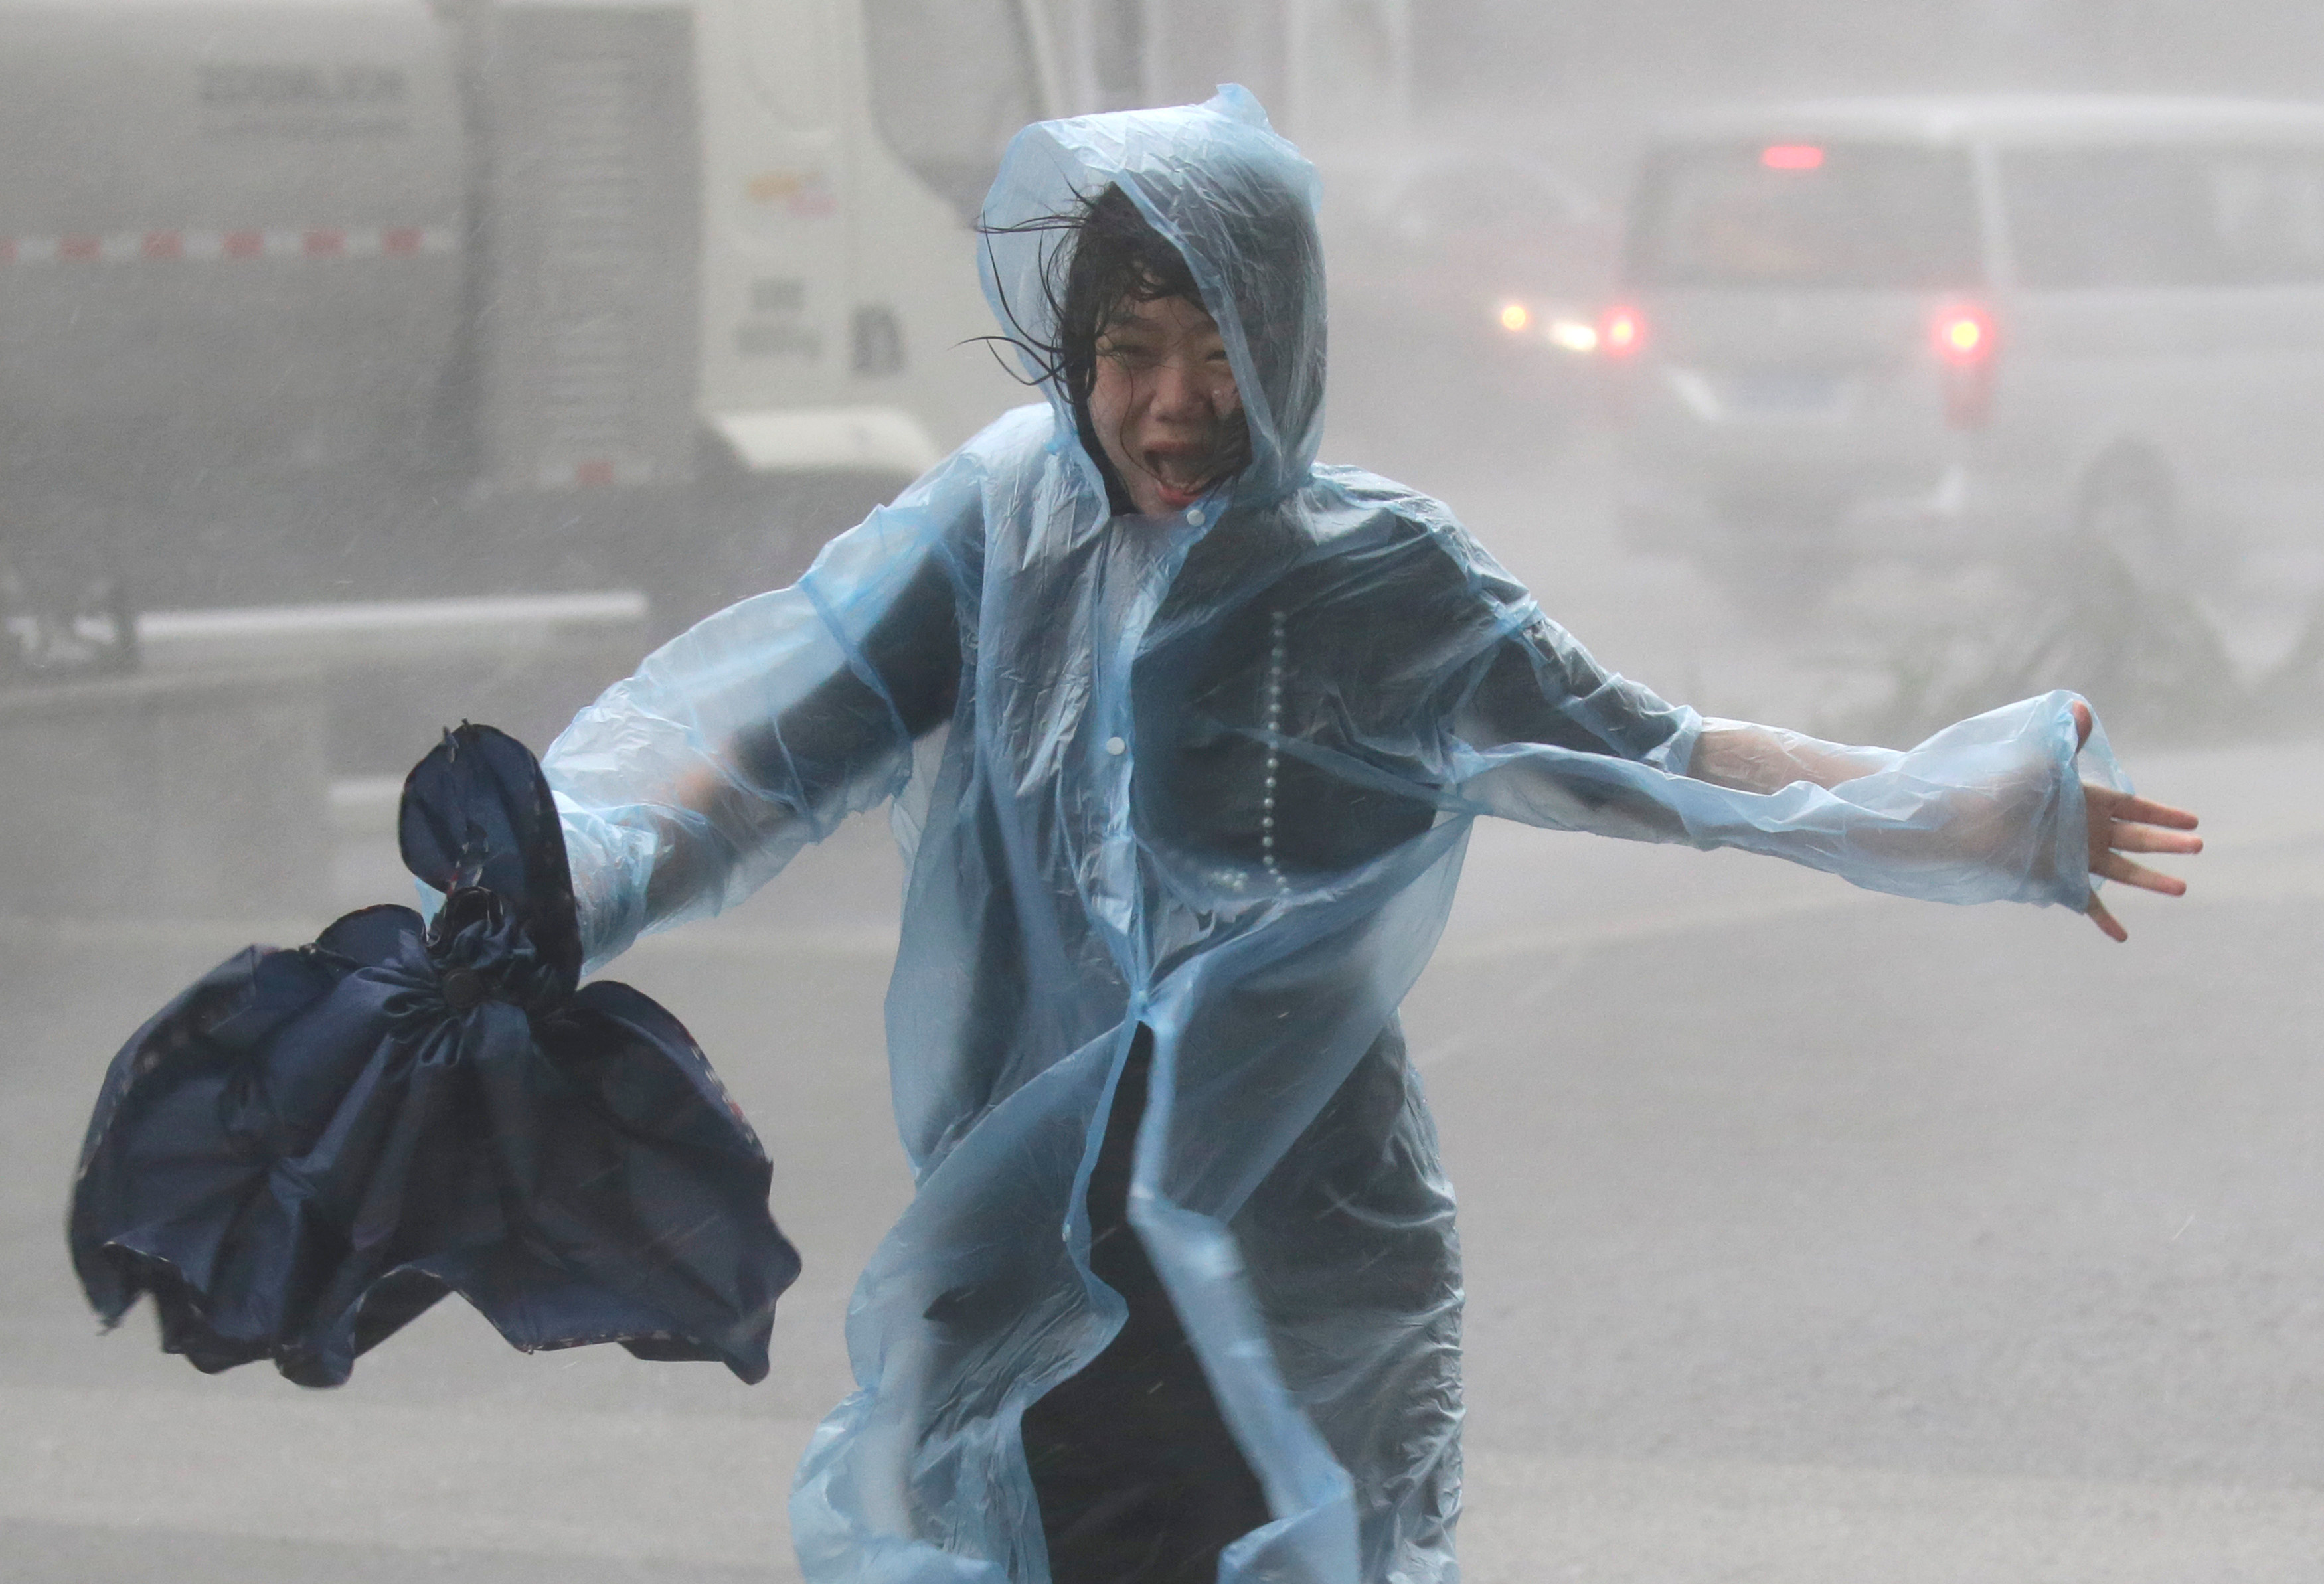 A woman runs in the rainstorm as Typhoon Mangkhut approaches Shenzhen, China on Sept. 16, 2018. (Jason Lee—Reuters)